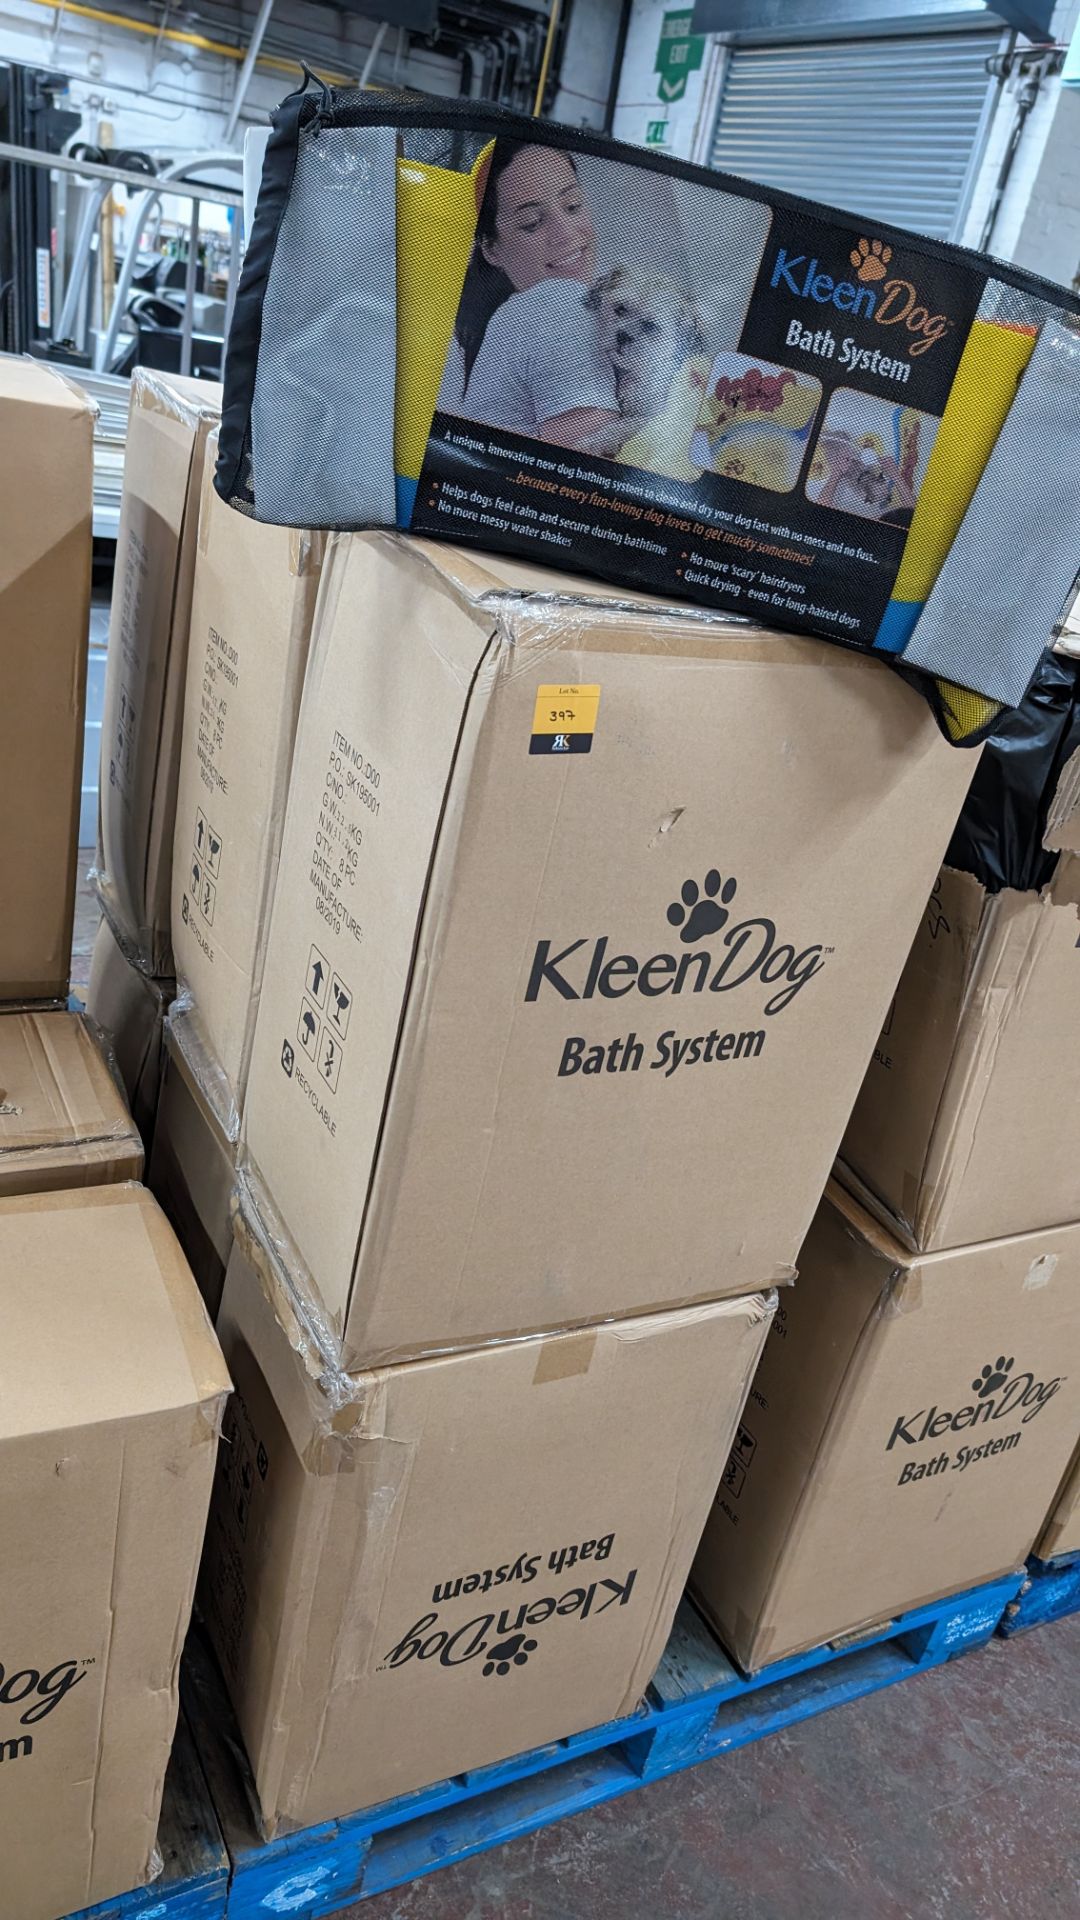 48 off Kleen Dog bath systems - 6 cartons - Image 5 of 6